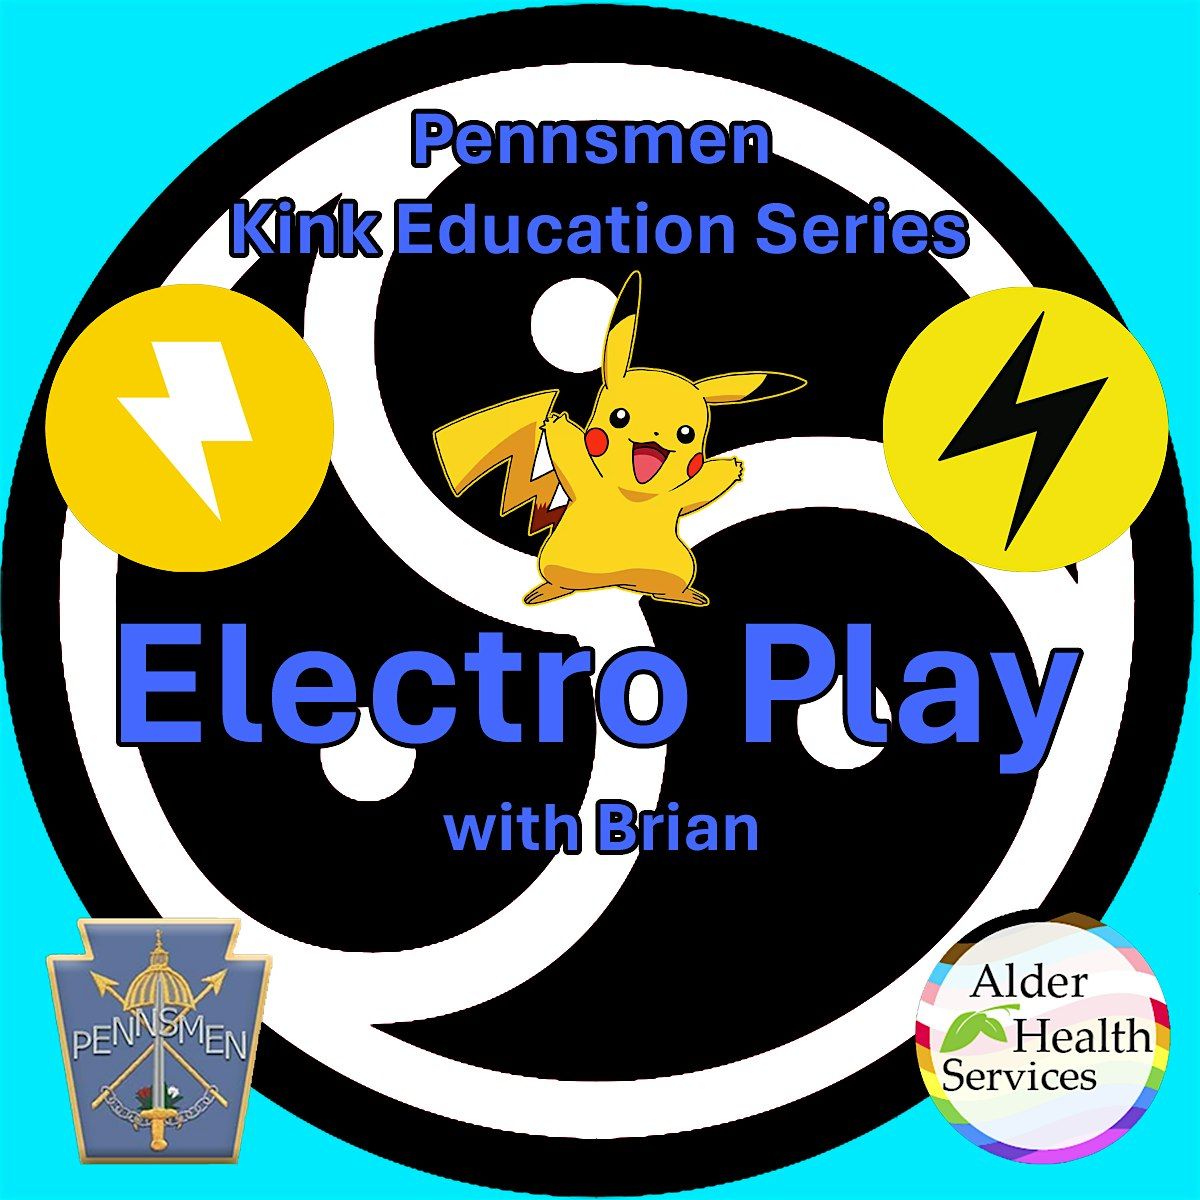 Pennsmen Kink Education Series: Electro Play with Brian